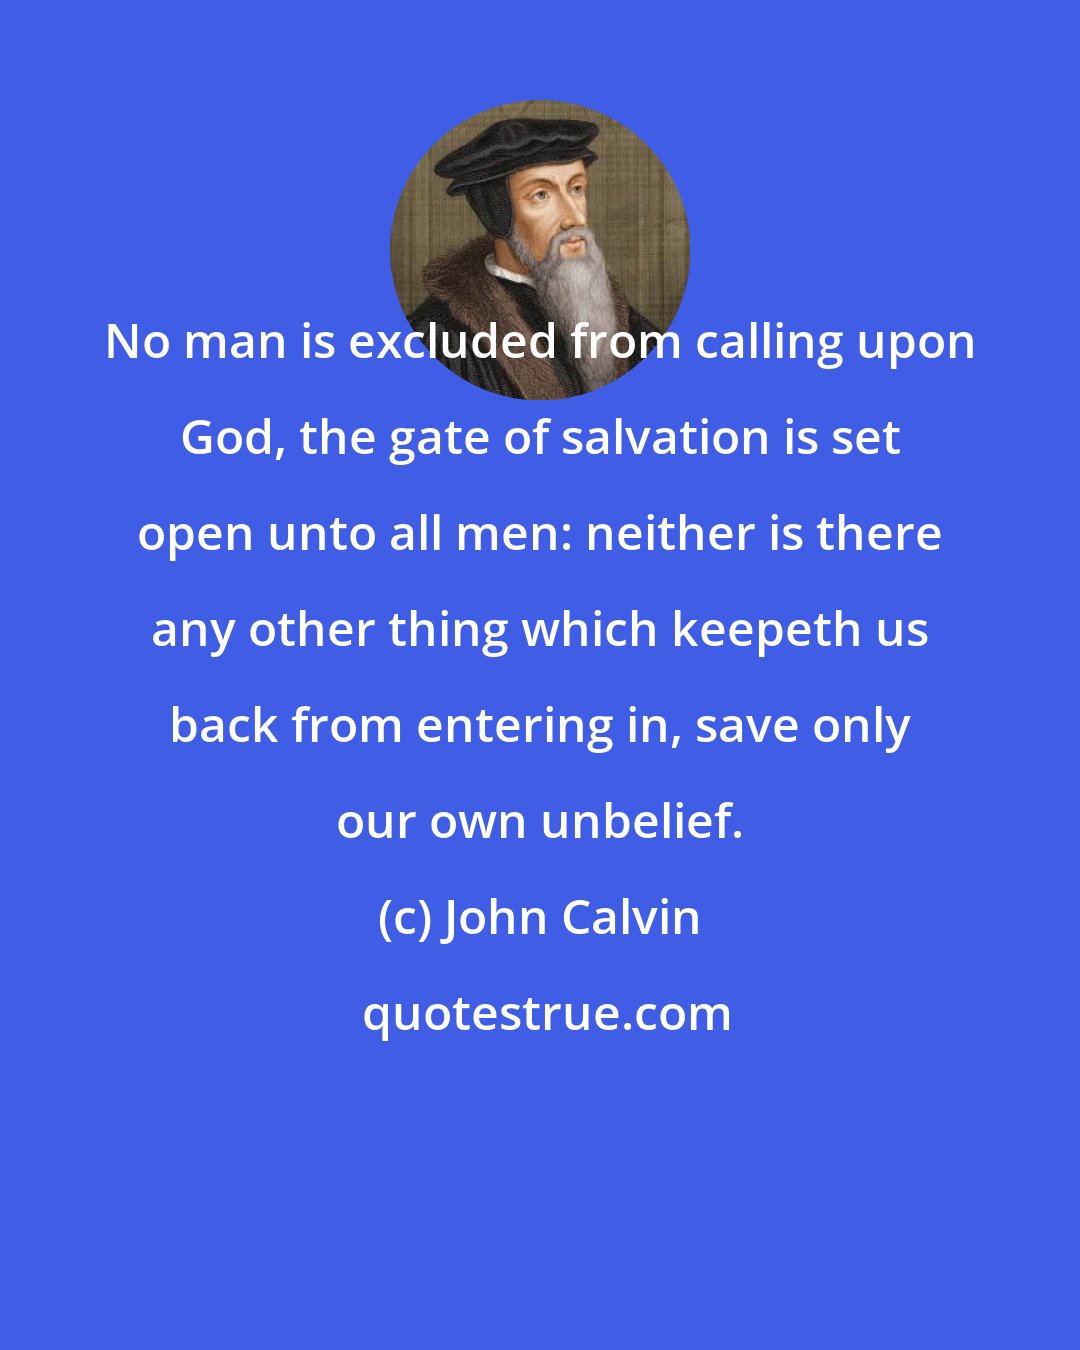 John Calvin: No man is excluded from calling upon God, the gate of salvation is set open unto all men: neither is there any other thing which keepeth us back from entering in, save only our own unbelief.